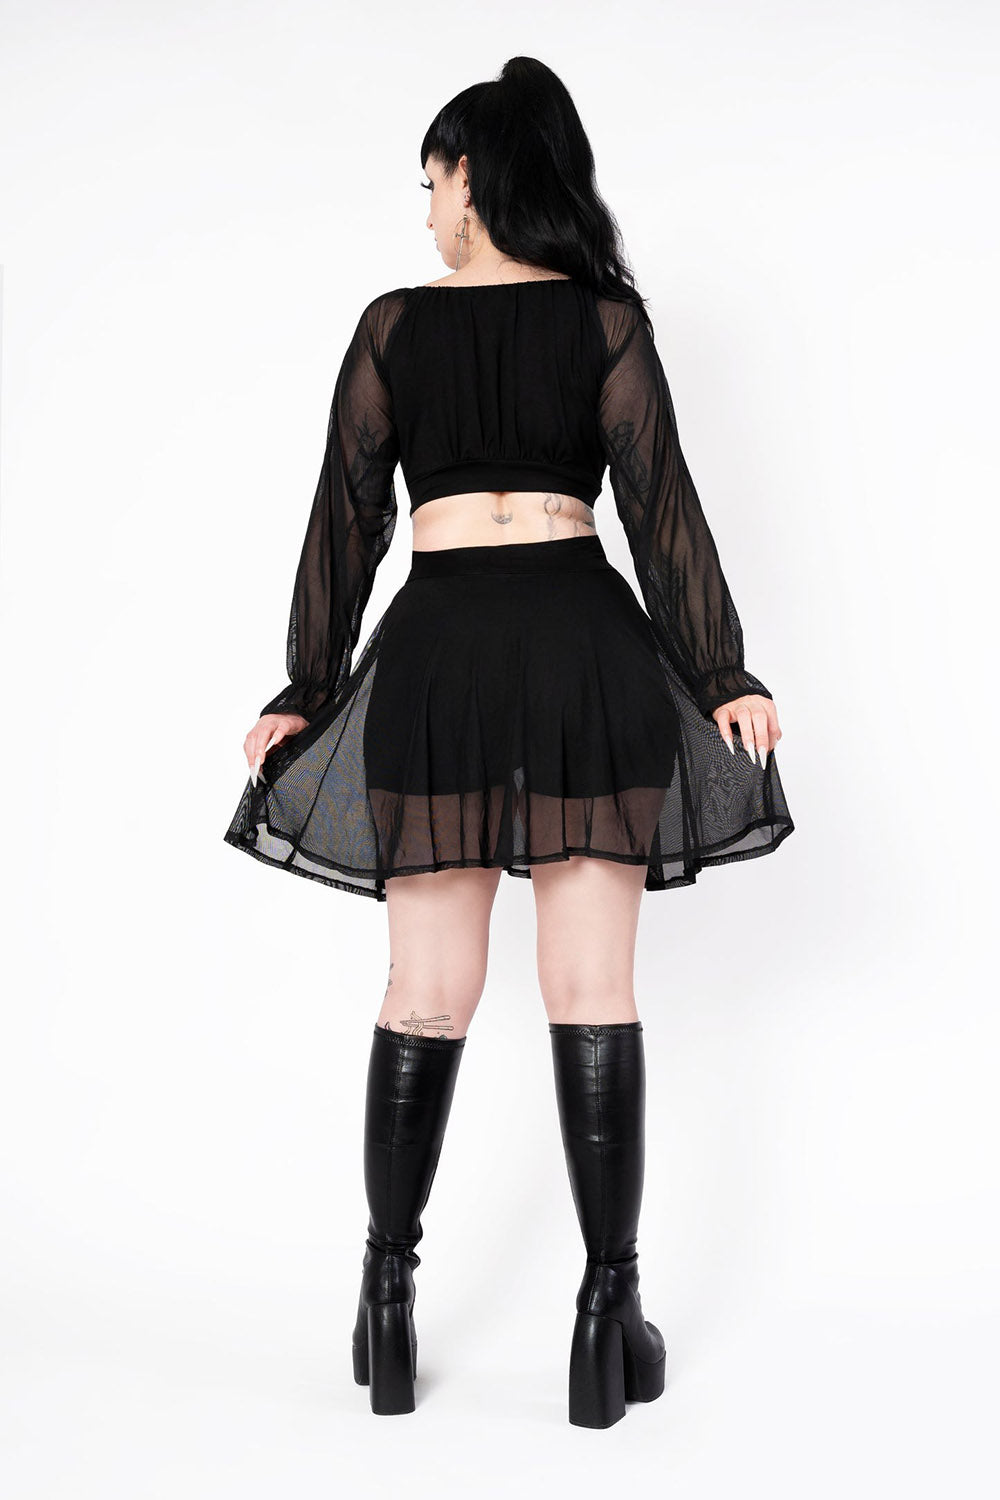 womens mesh gothic with built in shorts underneath